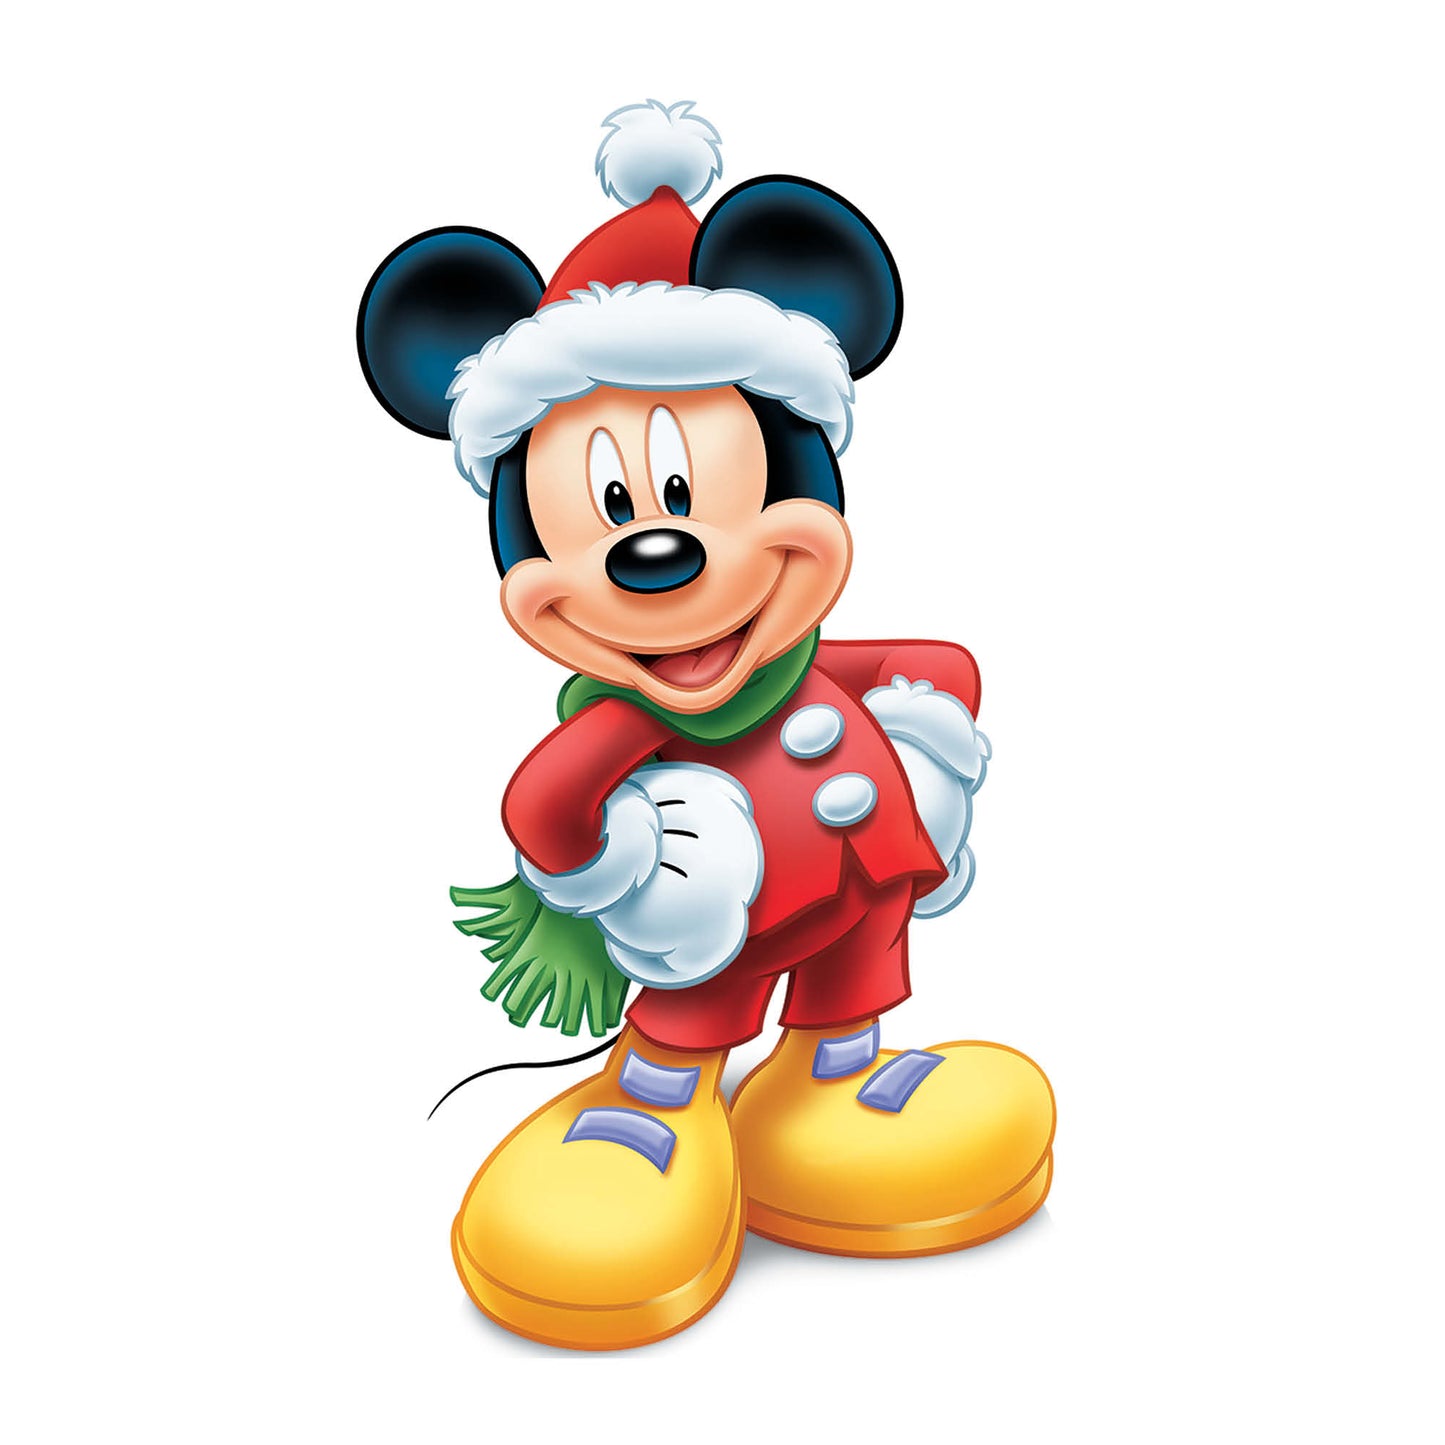 SC603 Mickey Mouse Christmas (Star Mini Cut-out) Cardboard Cut Out Height 91cm